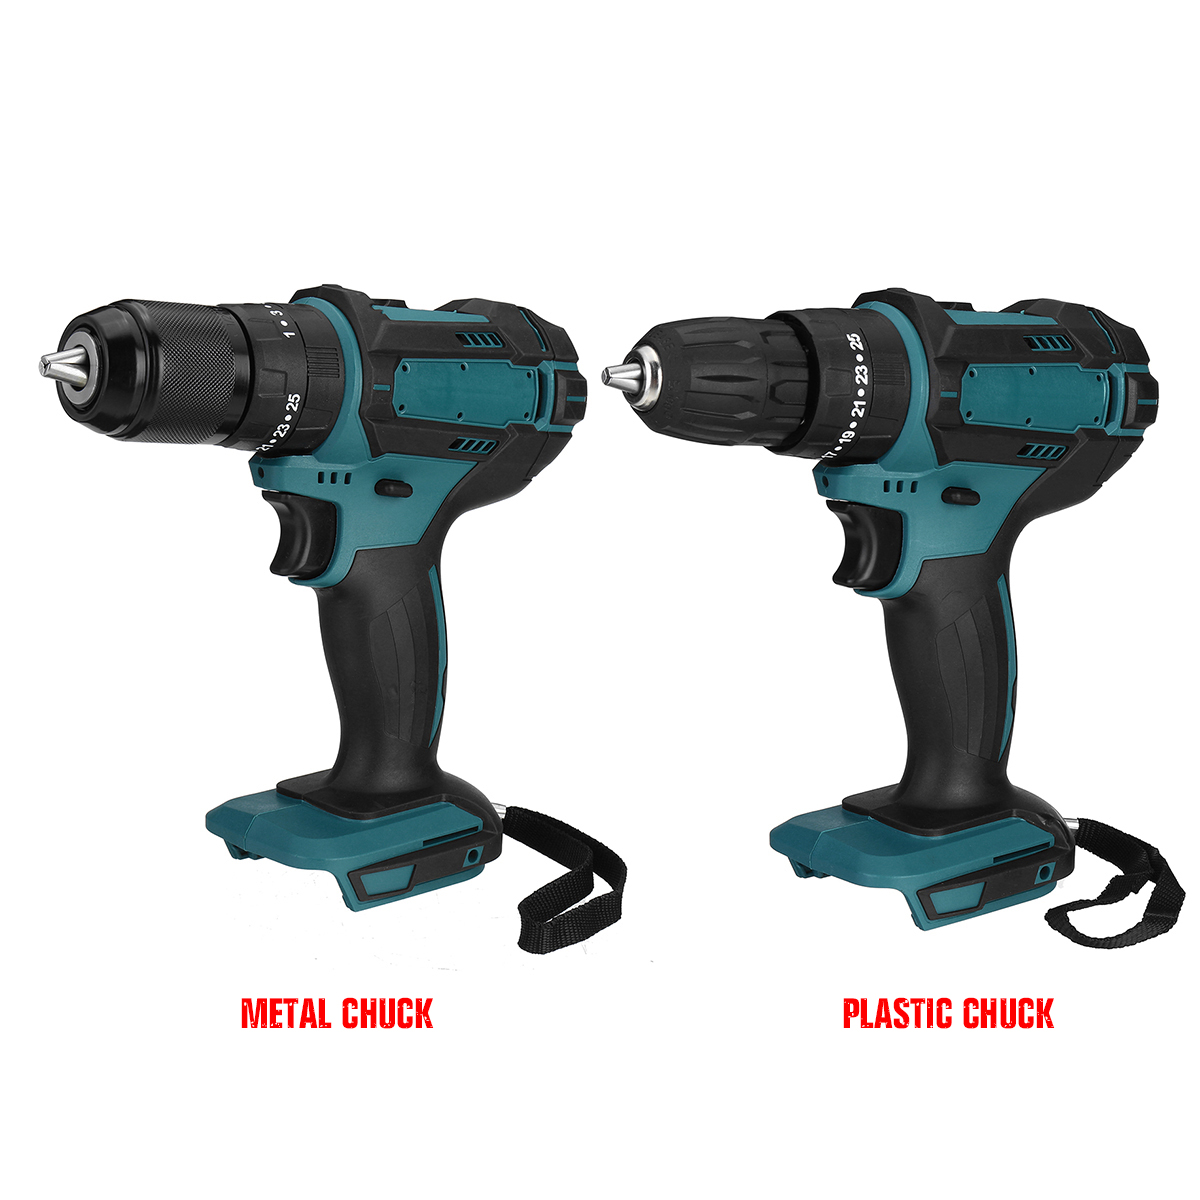 1013mm-Brushed-Electric-Drill-Impact-Drill-Hammer-Screwdriver-for-Makita-21V-Battery-1773143-10